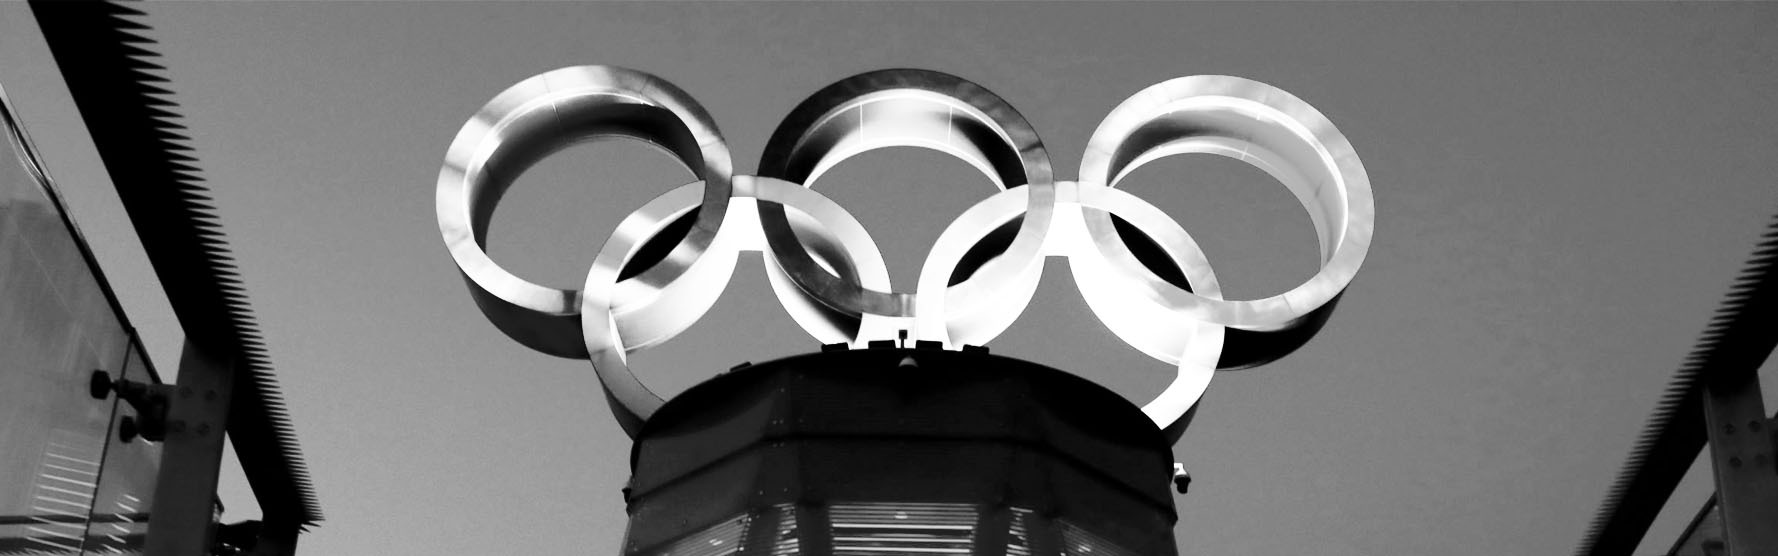 Reuters Report: Non-Vaccinated Winter Olympic Athletes To Quarantine For 21 Days